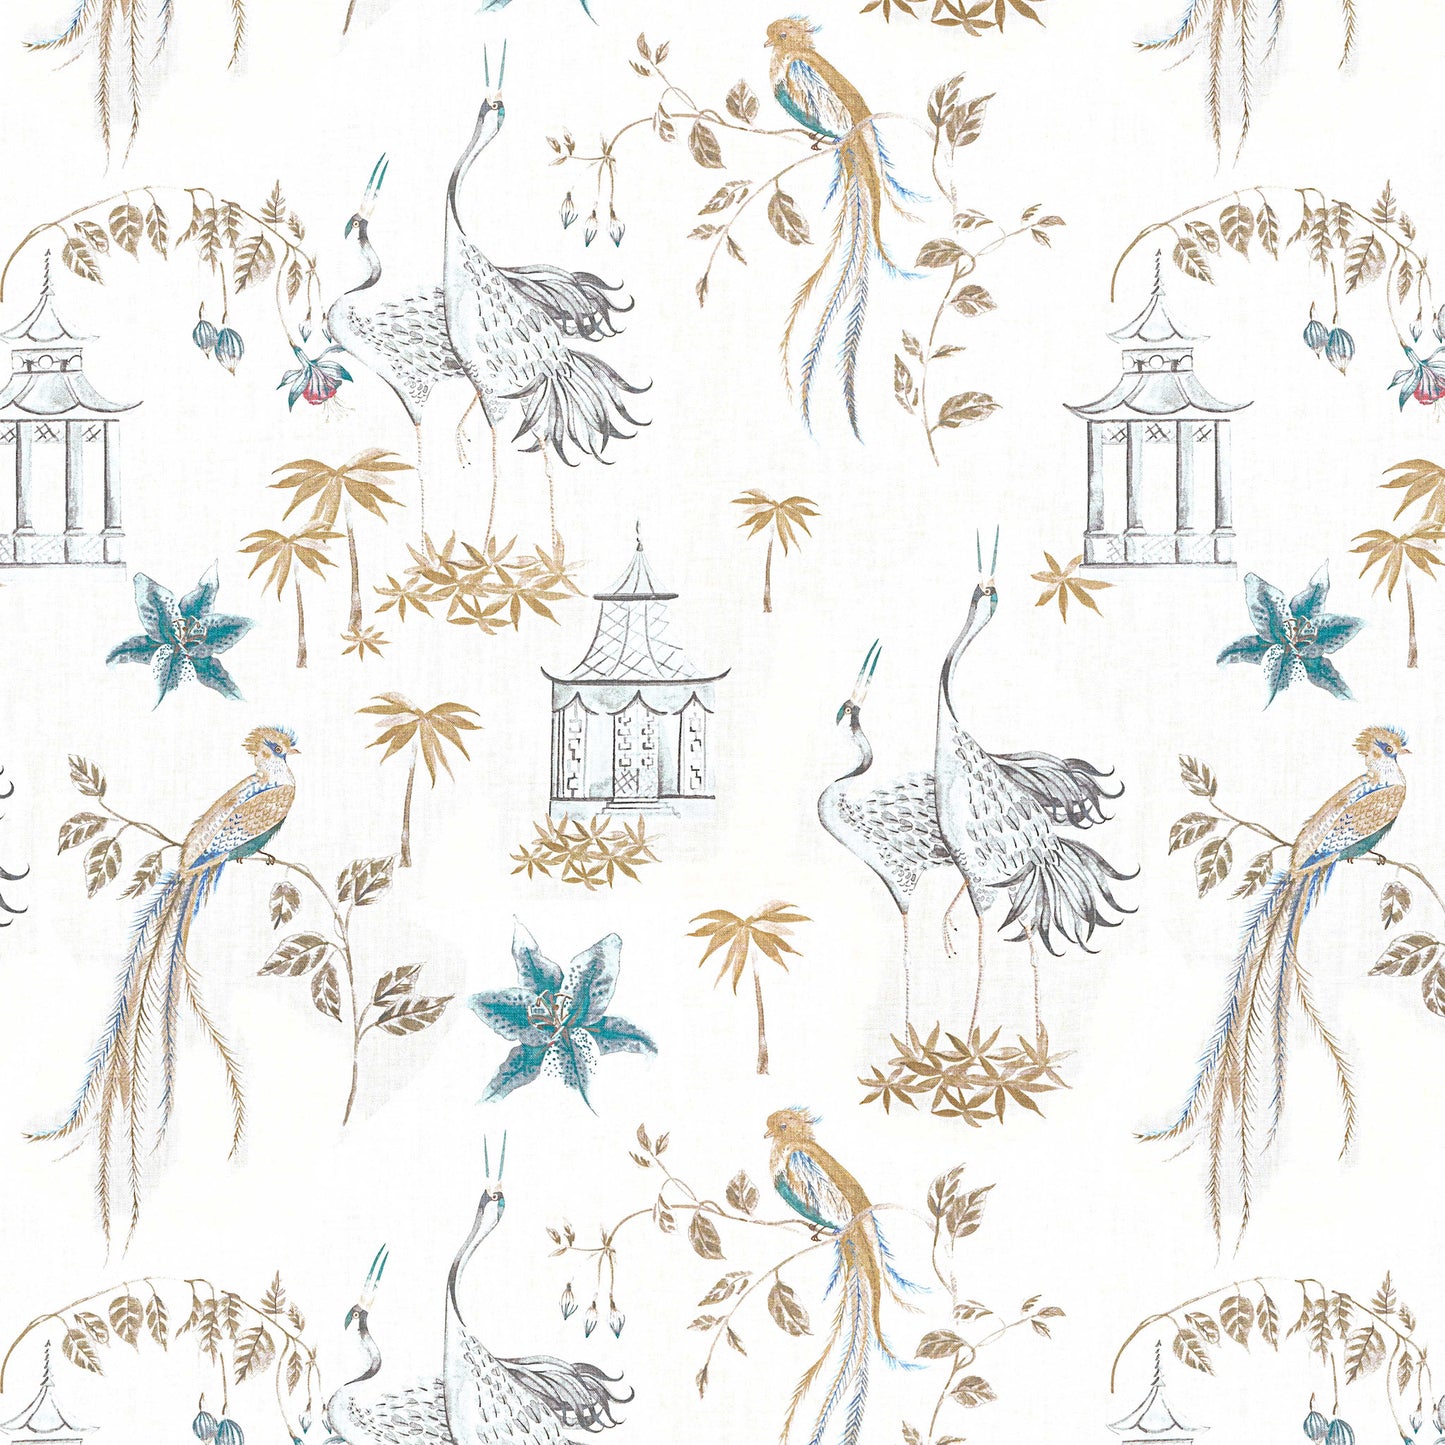 Tailored Tier Cafe Curtain Panels Pair in Let It Crane Aegean Blue Oriental Toile, Multicolor Chinoiserie